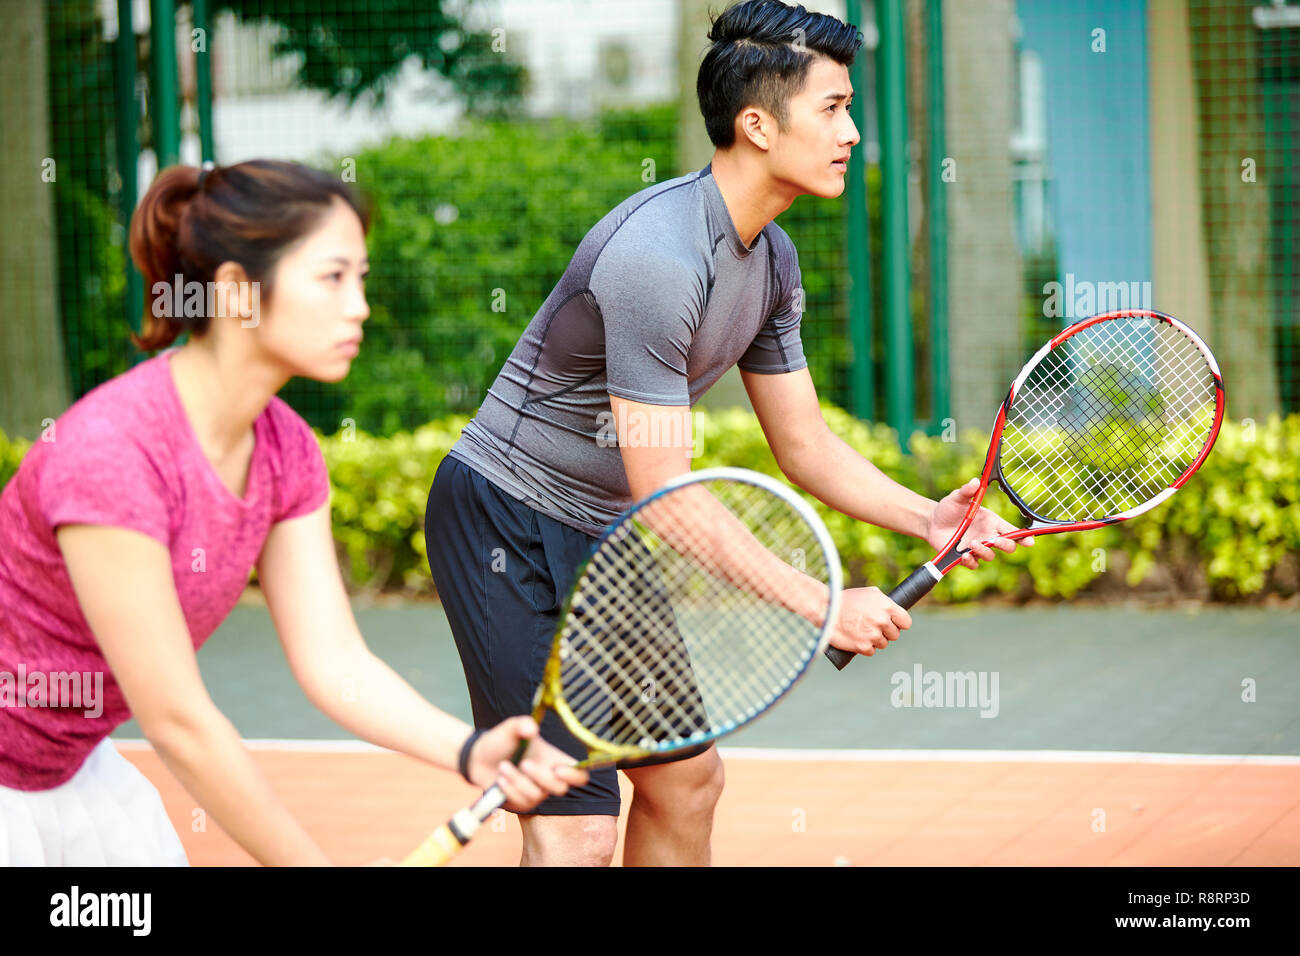 young asian pair of man and woman tennis players in a mixed double match, focus on the background man Stock Photo